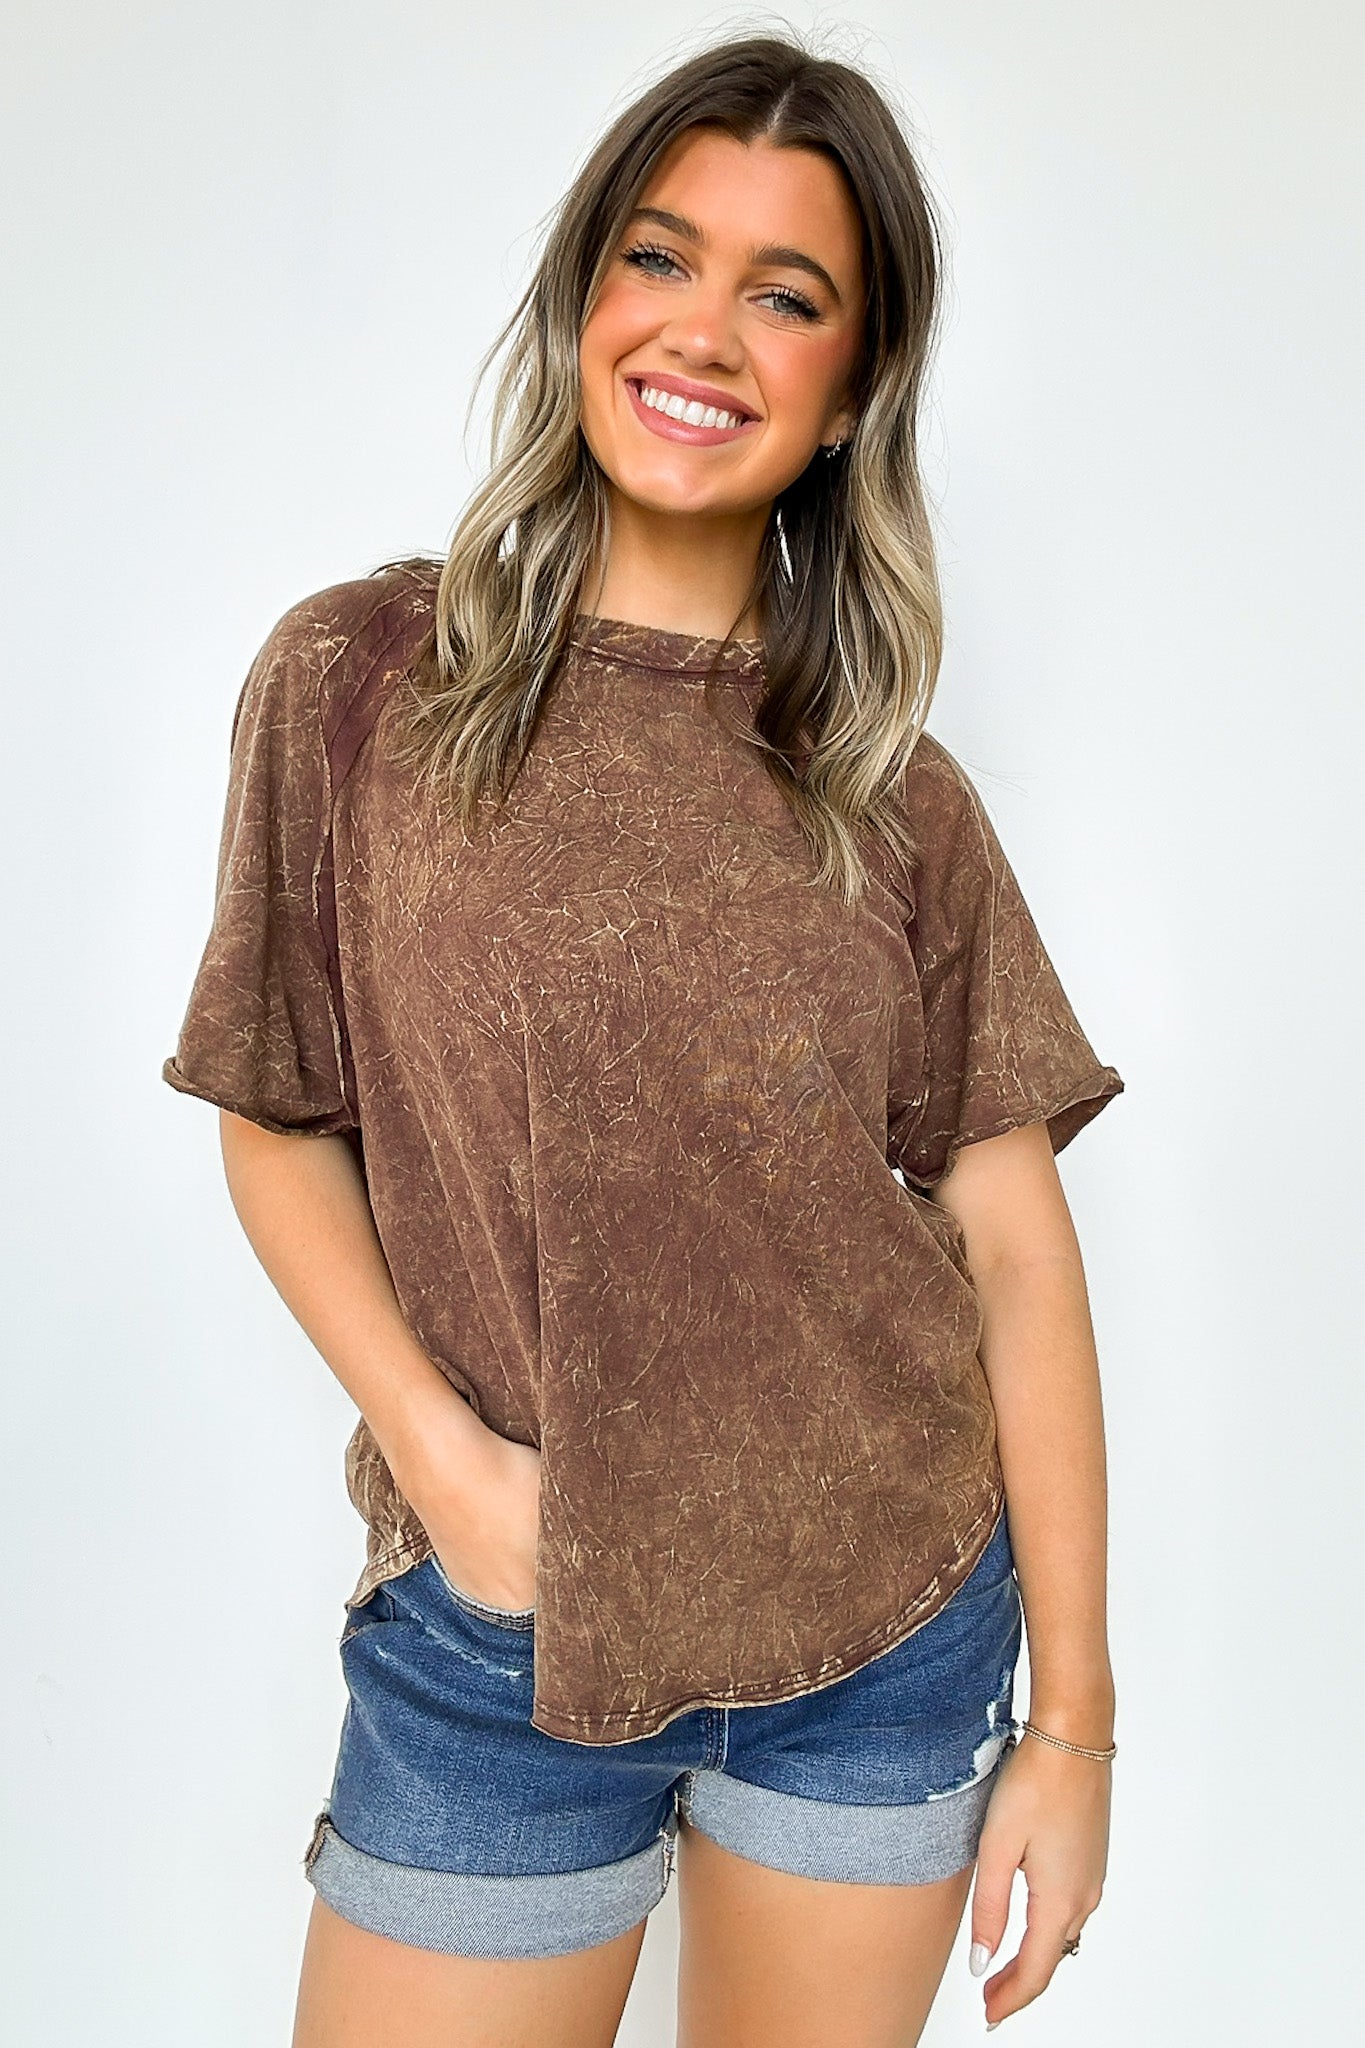  Carowyn Mineral Wash Relaxed Fit Top - BACK IN STOCK - Madison and Mallory